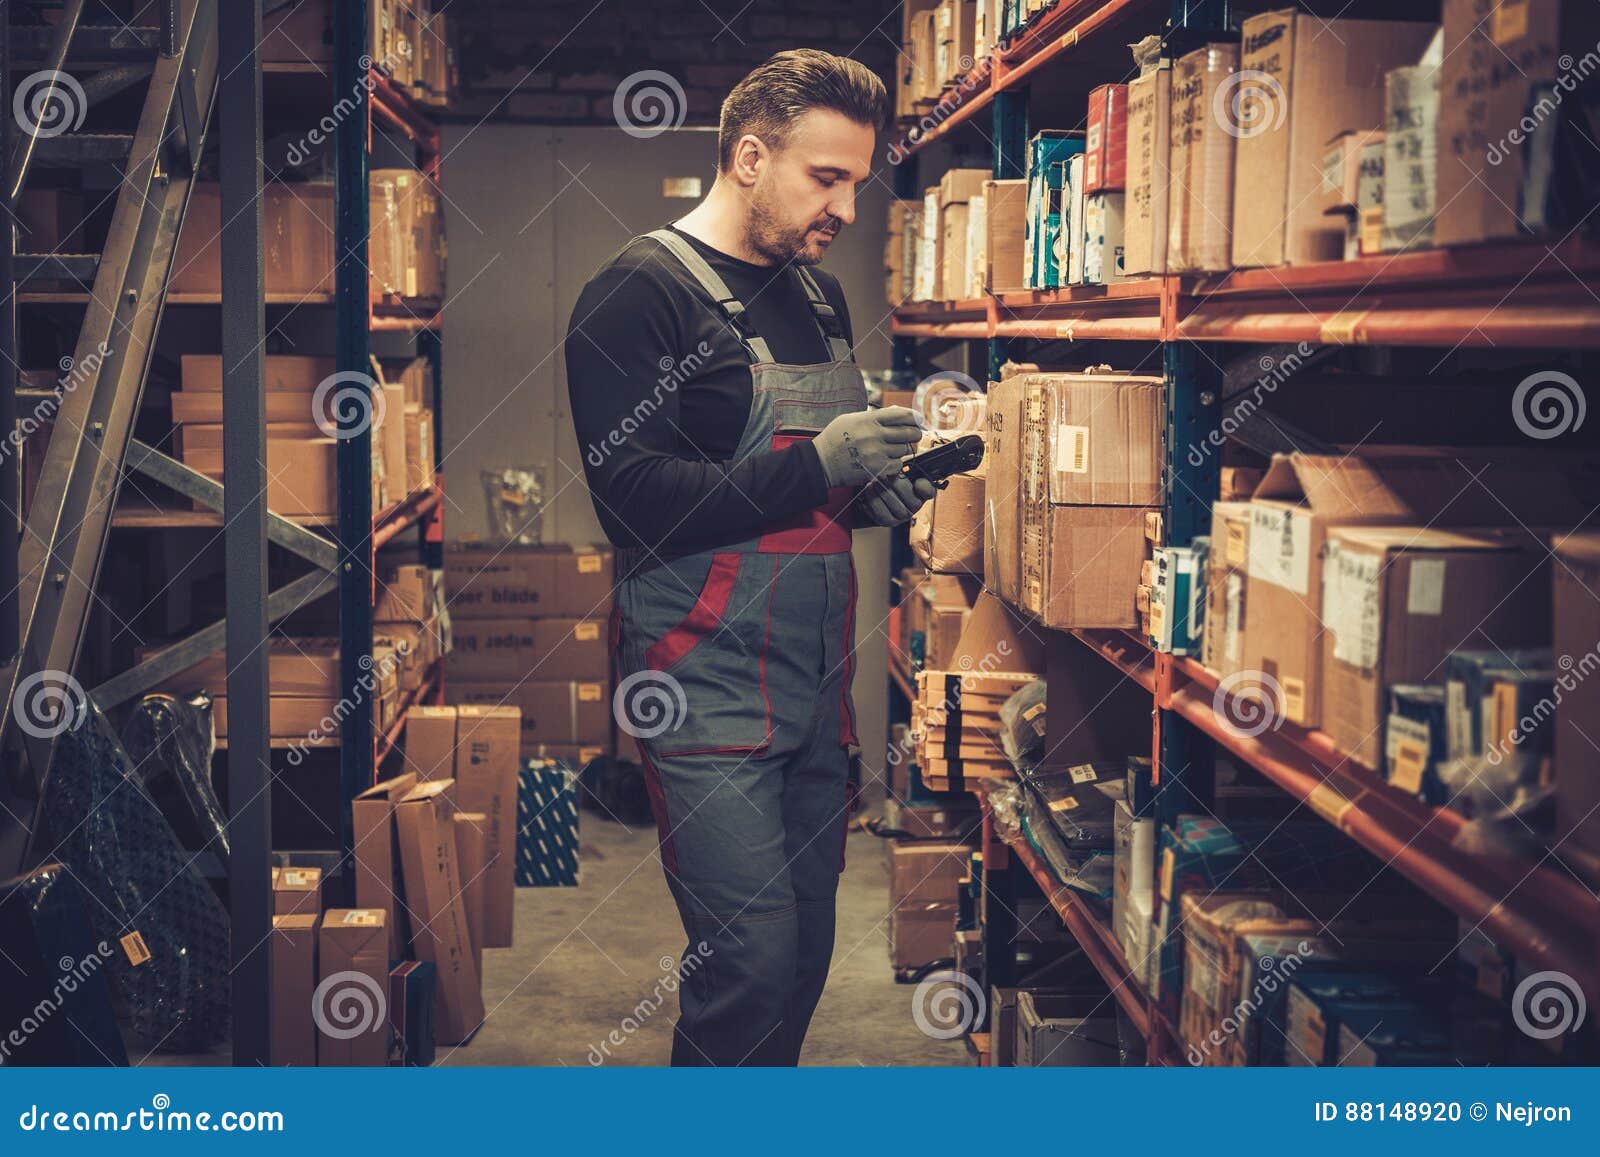 storekeeper with handheld barcode scanner working in a warehouse